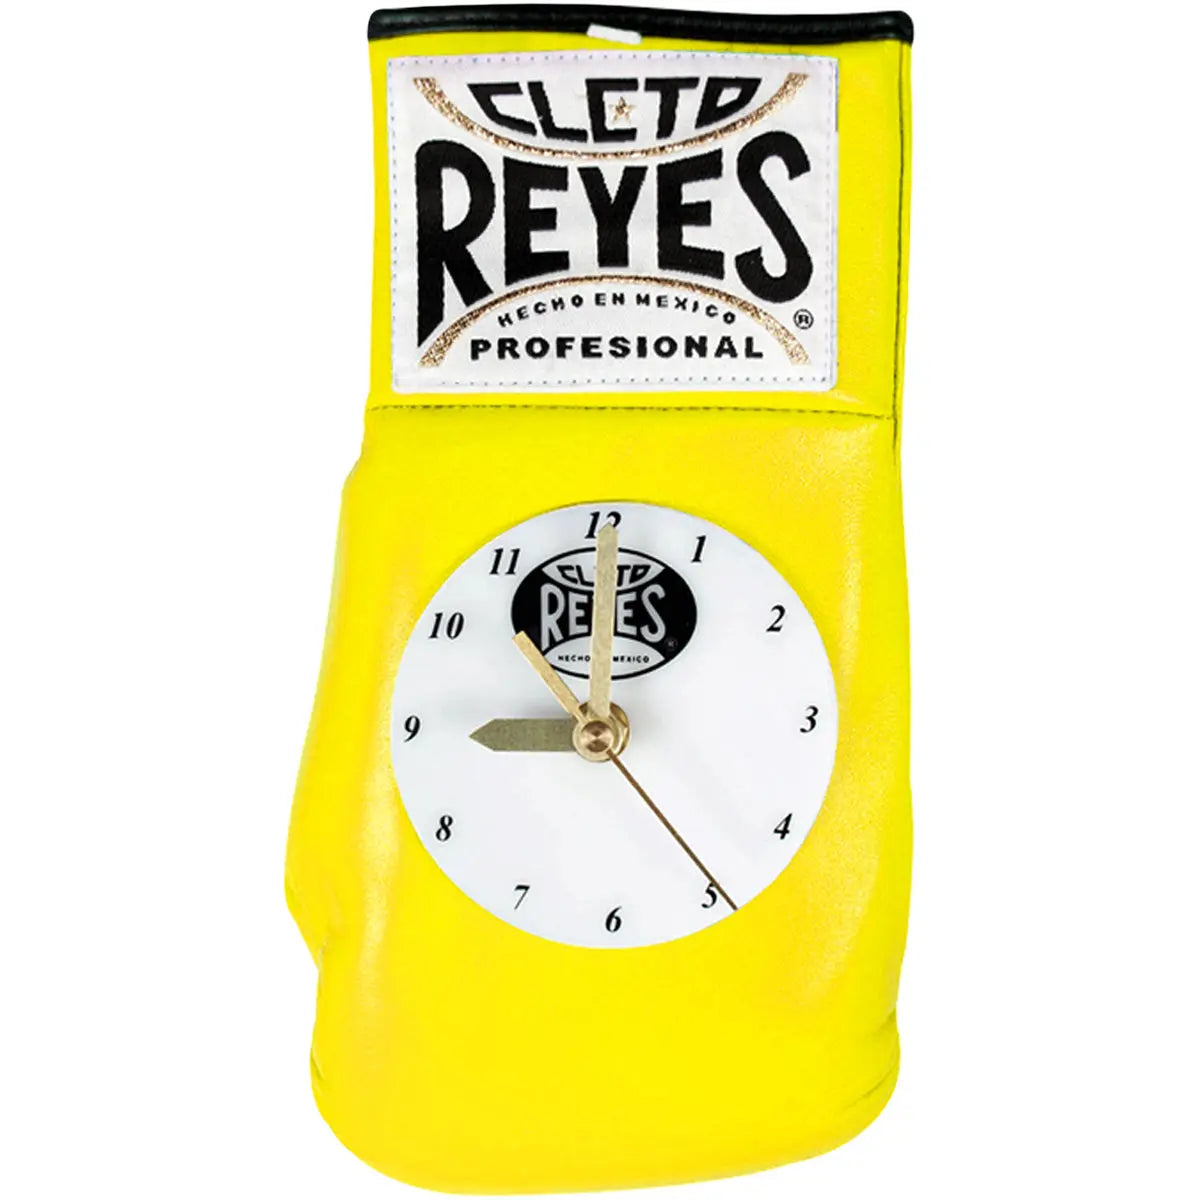 Cleto Reyes 10 oz. Authentic Pro Fight Leather Clock Glove - Yellow Cleto Reyes